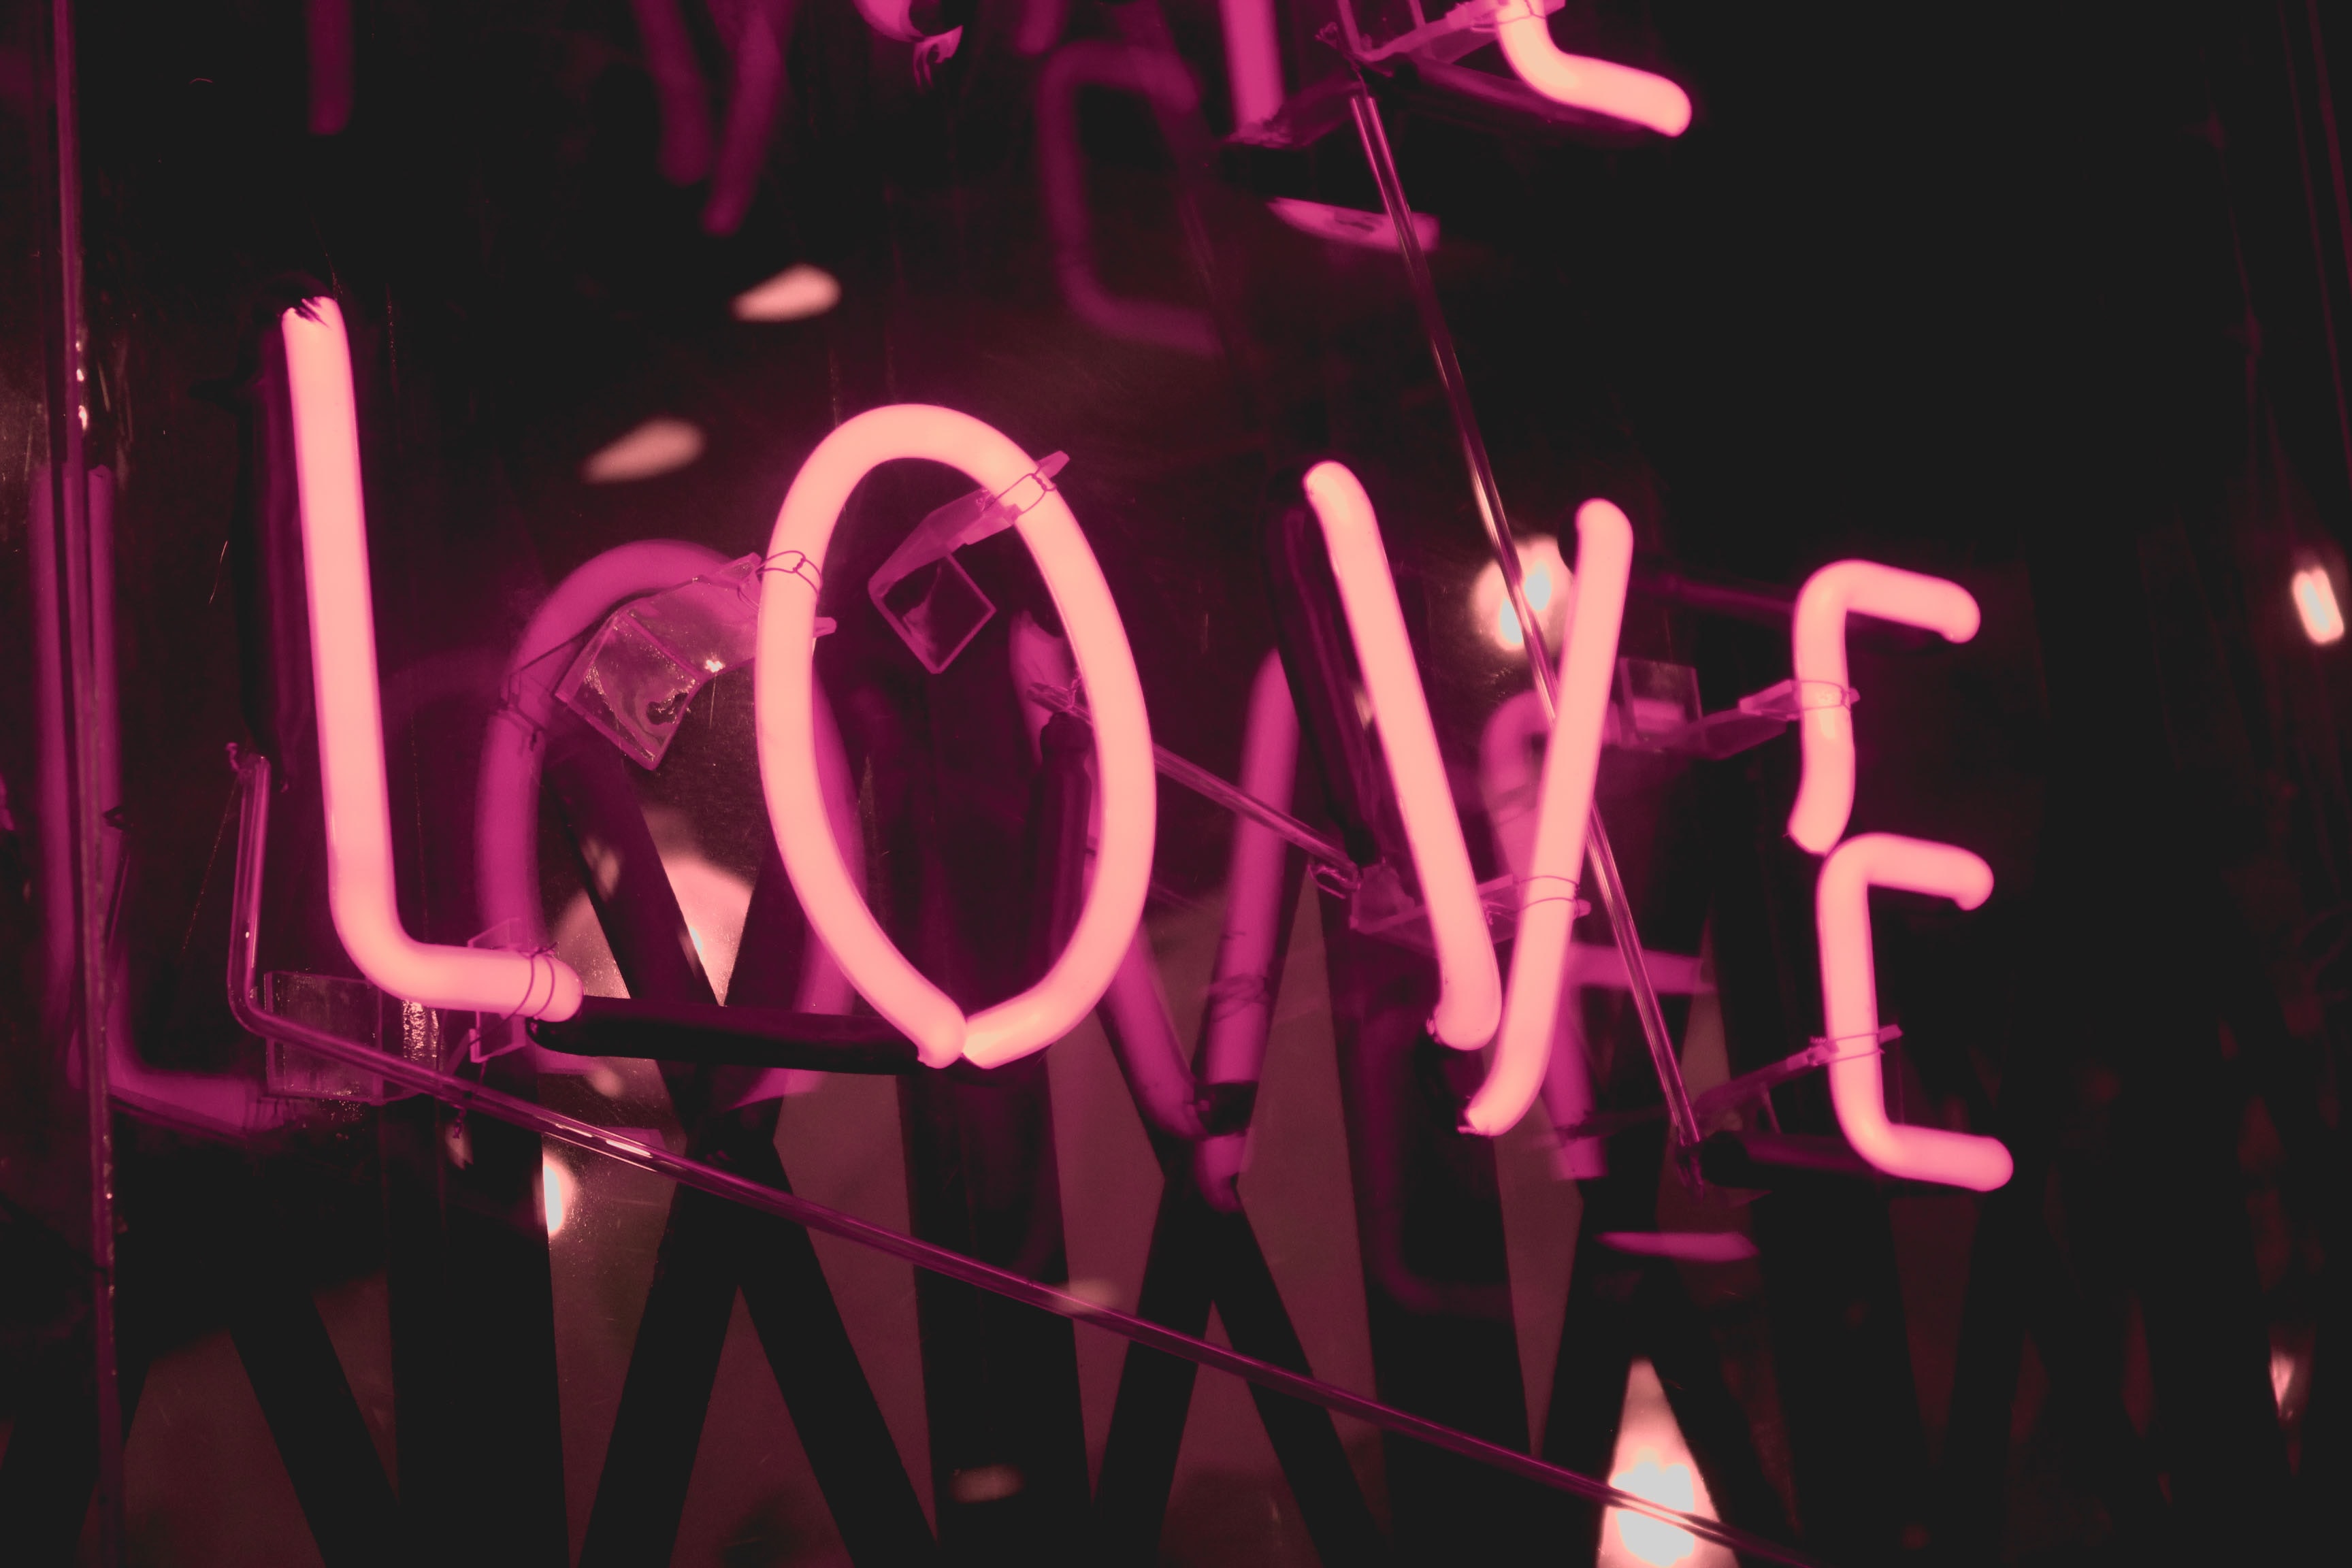 Neon "Love" sign in pink